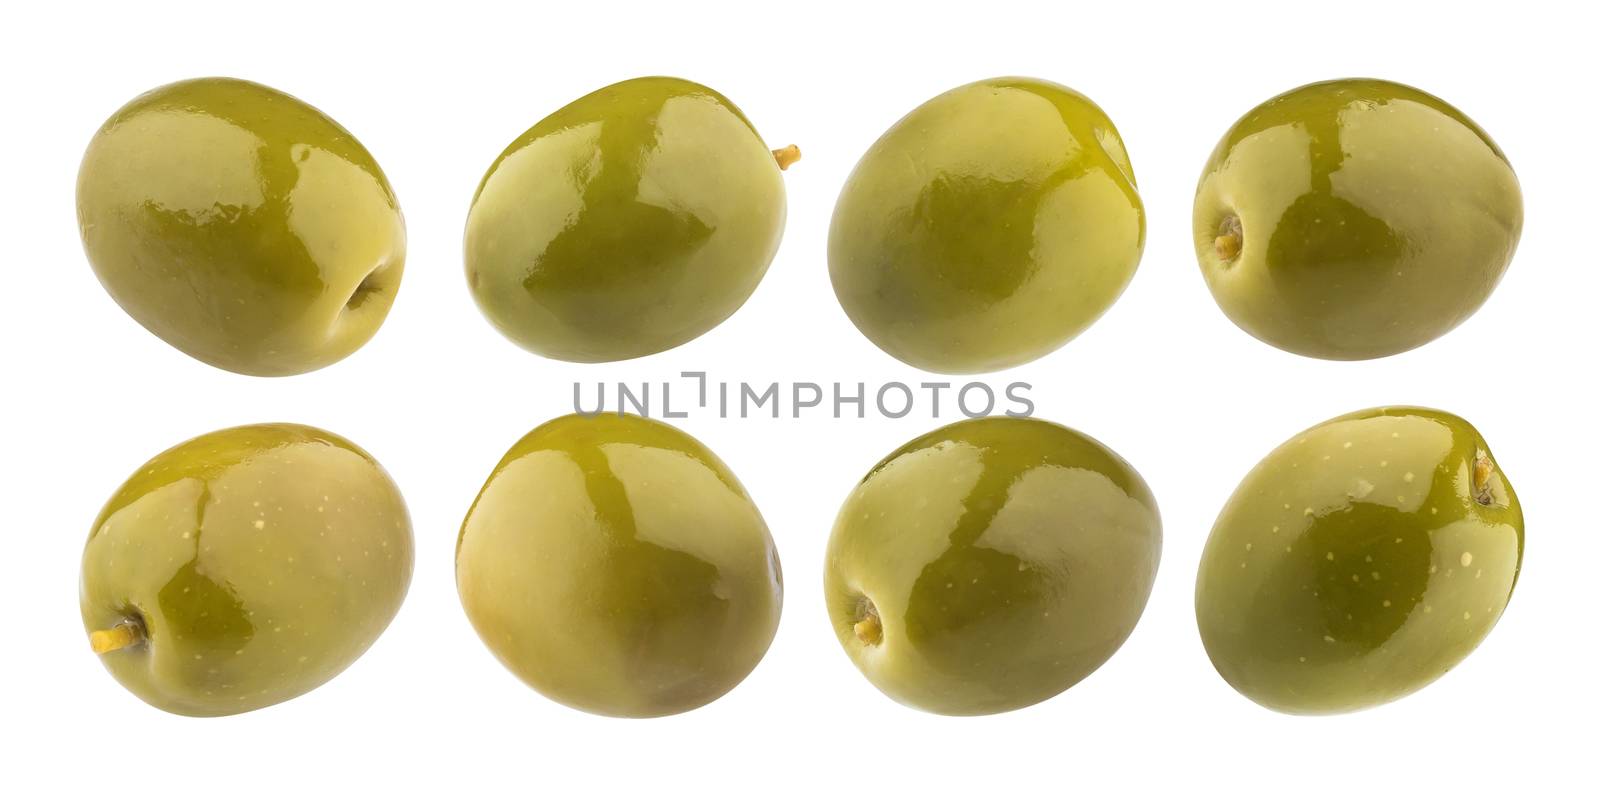 Olives collection. Green olive isolated on white background with clipping path, close up